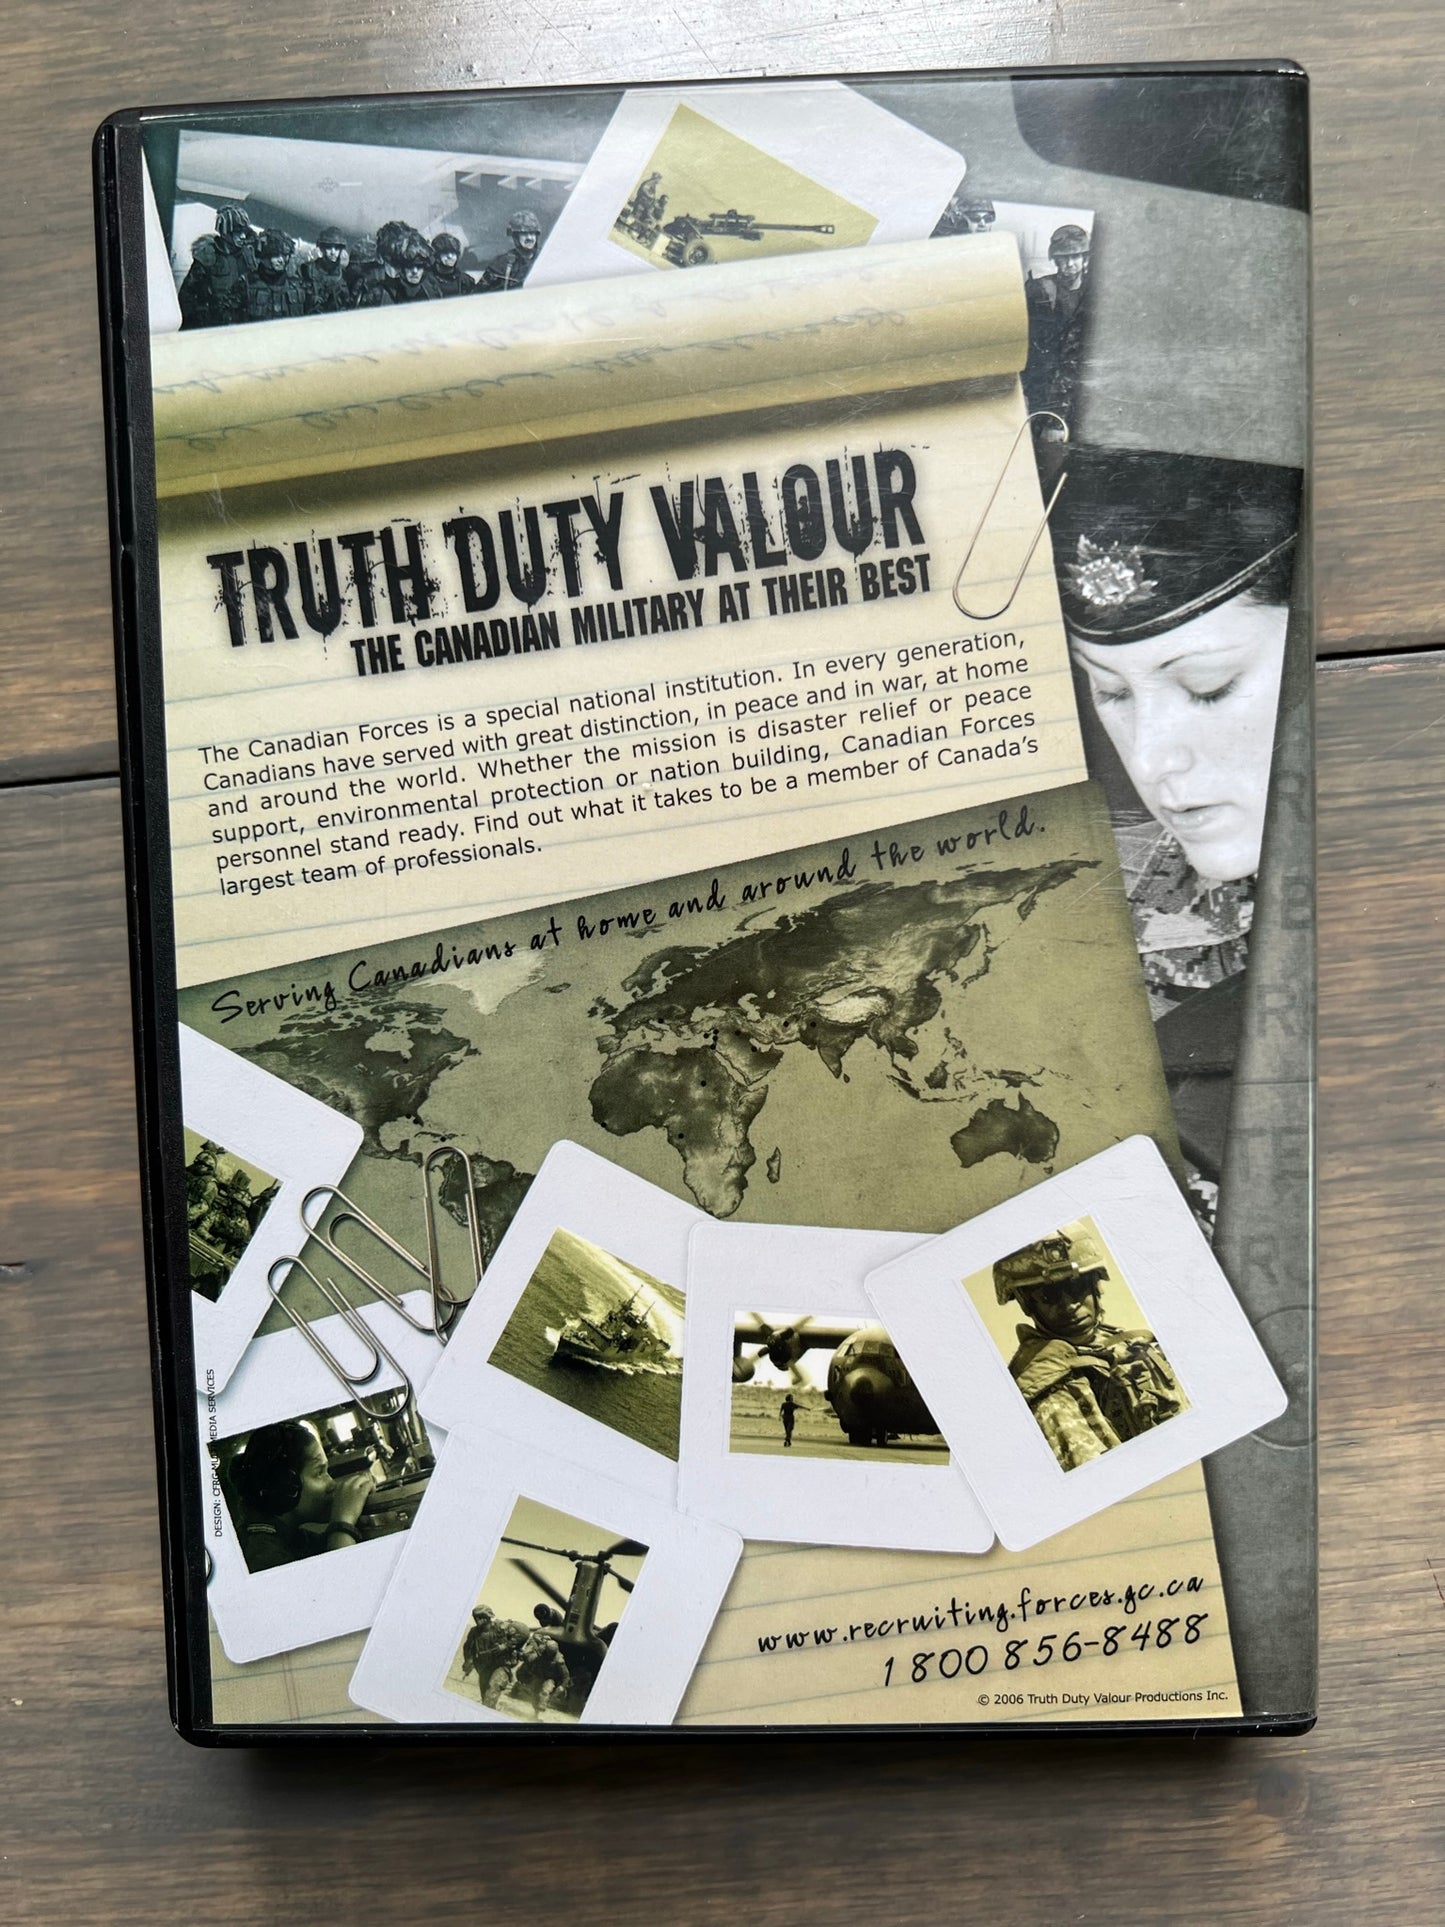 8 DVD BOX SET - TRUTH DUTY VALOUR - Canadian Military Forces 26 Episodes TV Show